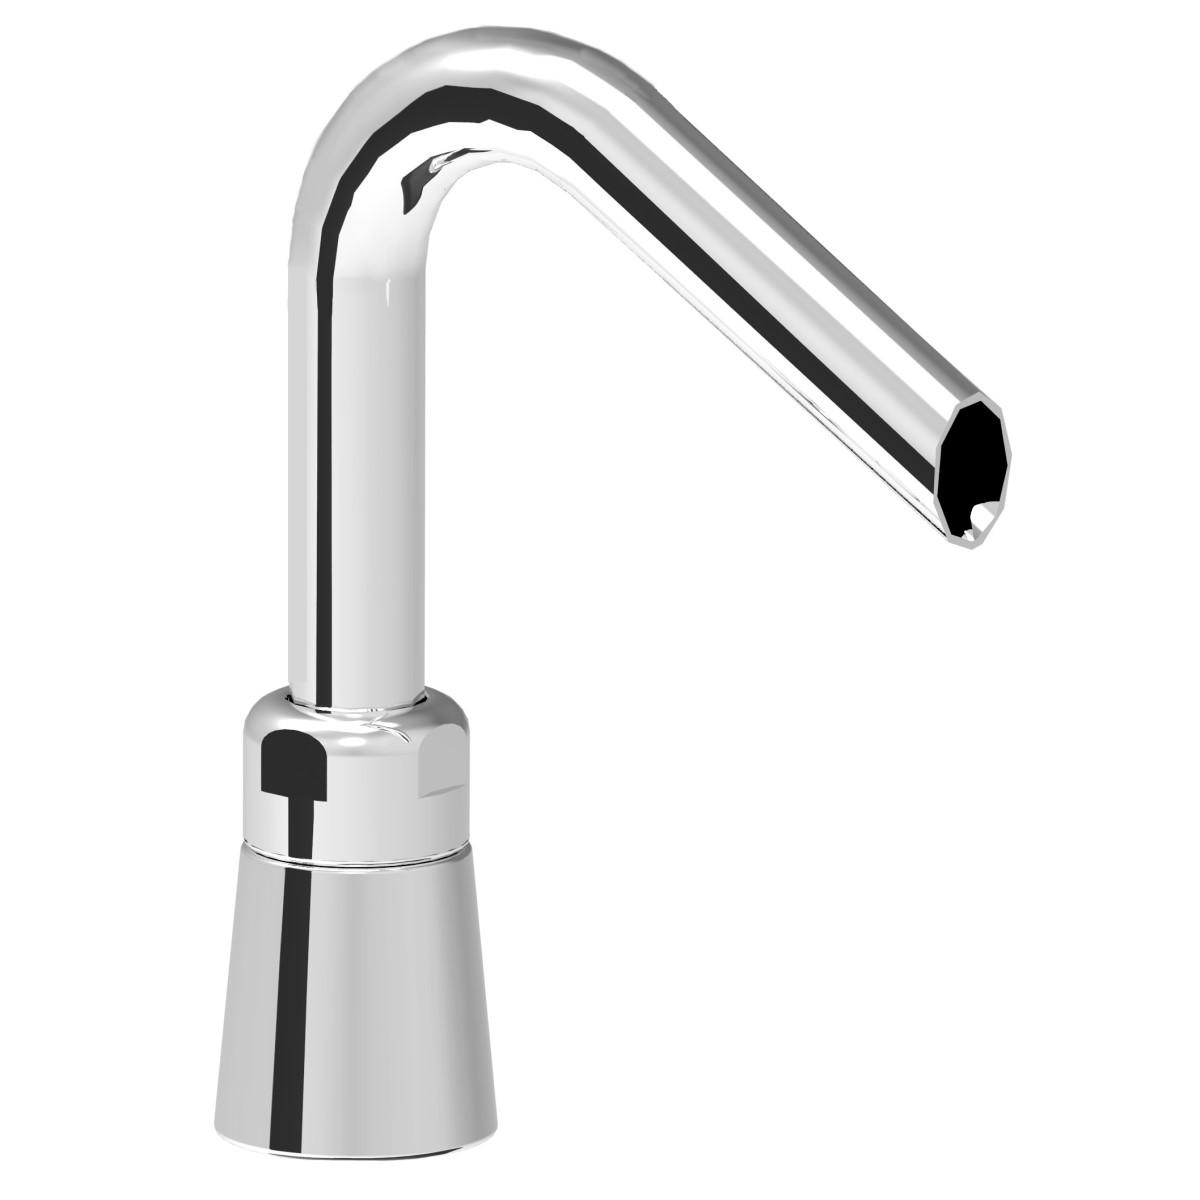 Filler spout with conical base adjustable outlet